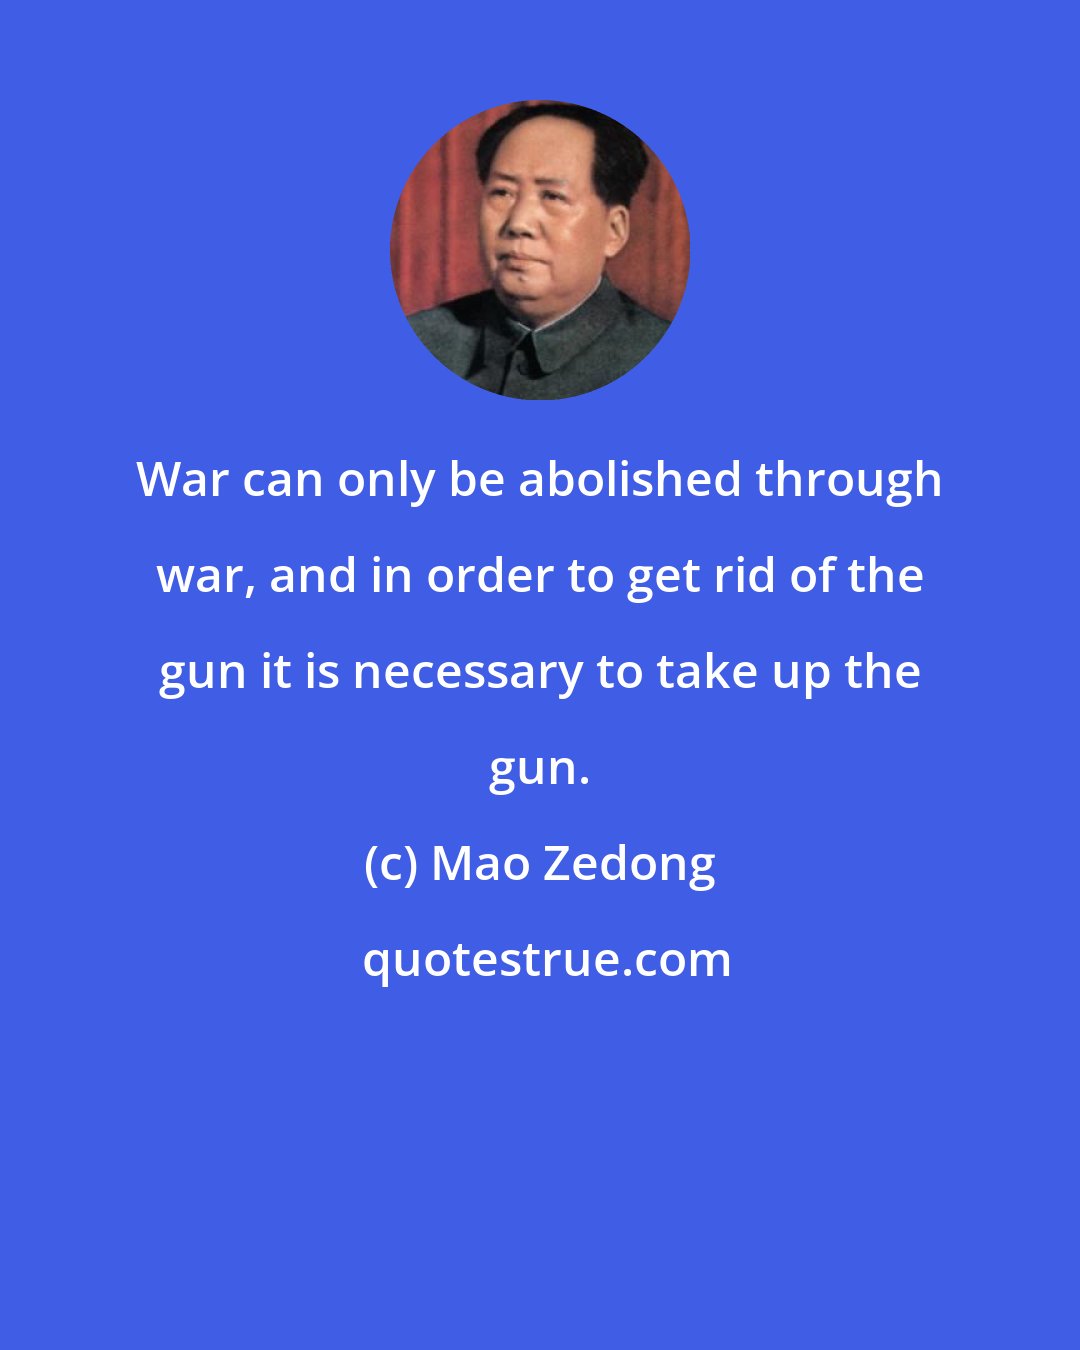 Mao Zedong: War can only be abolished through war, and in order to get rid of the gun it is necessary to take up the gun.